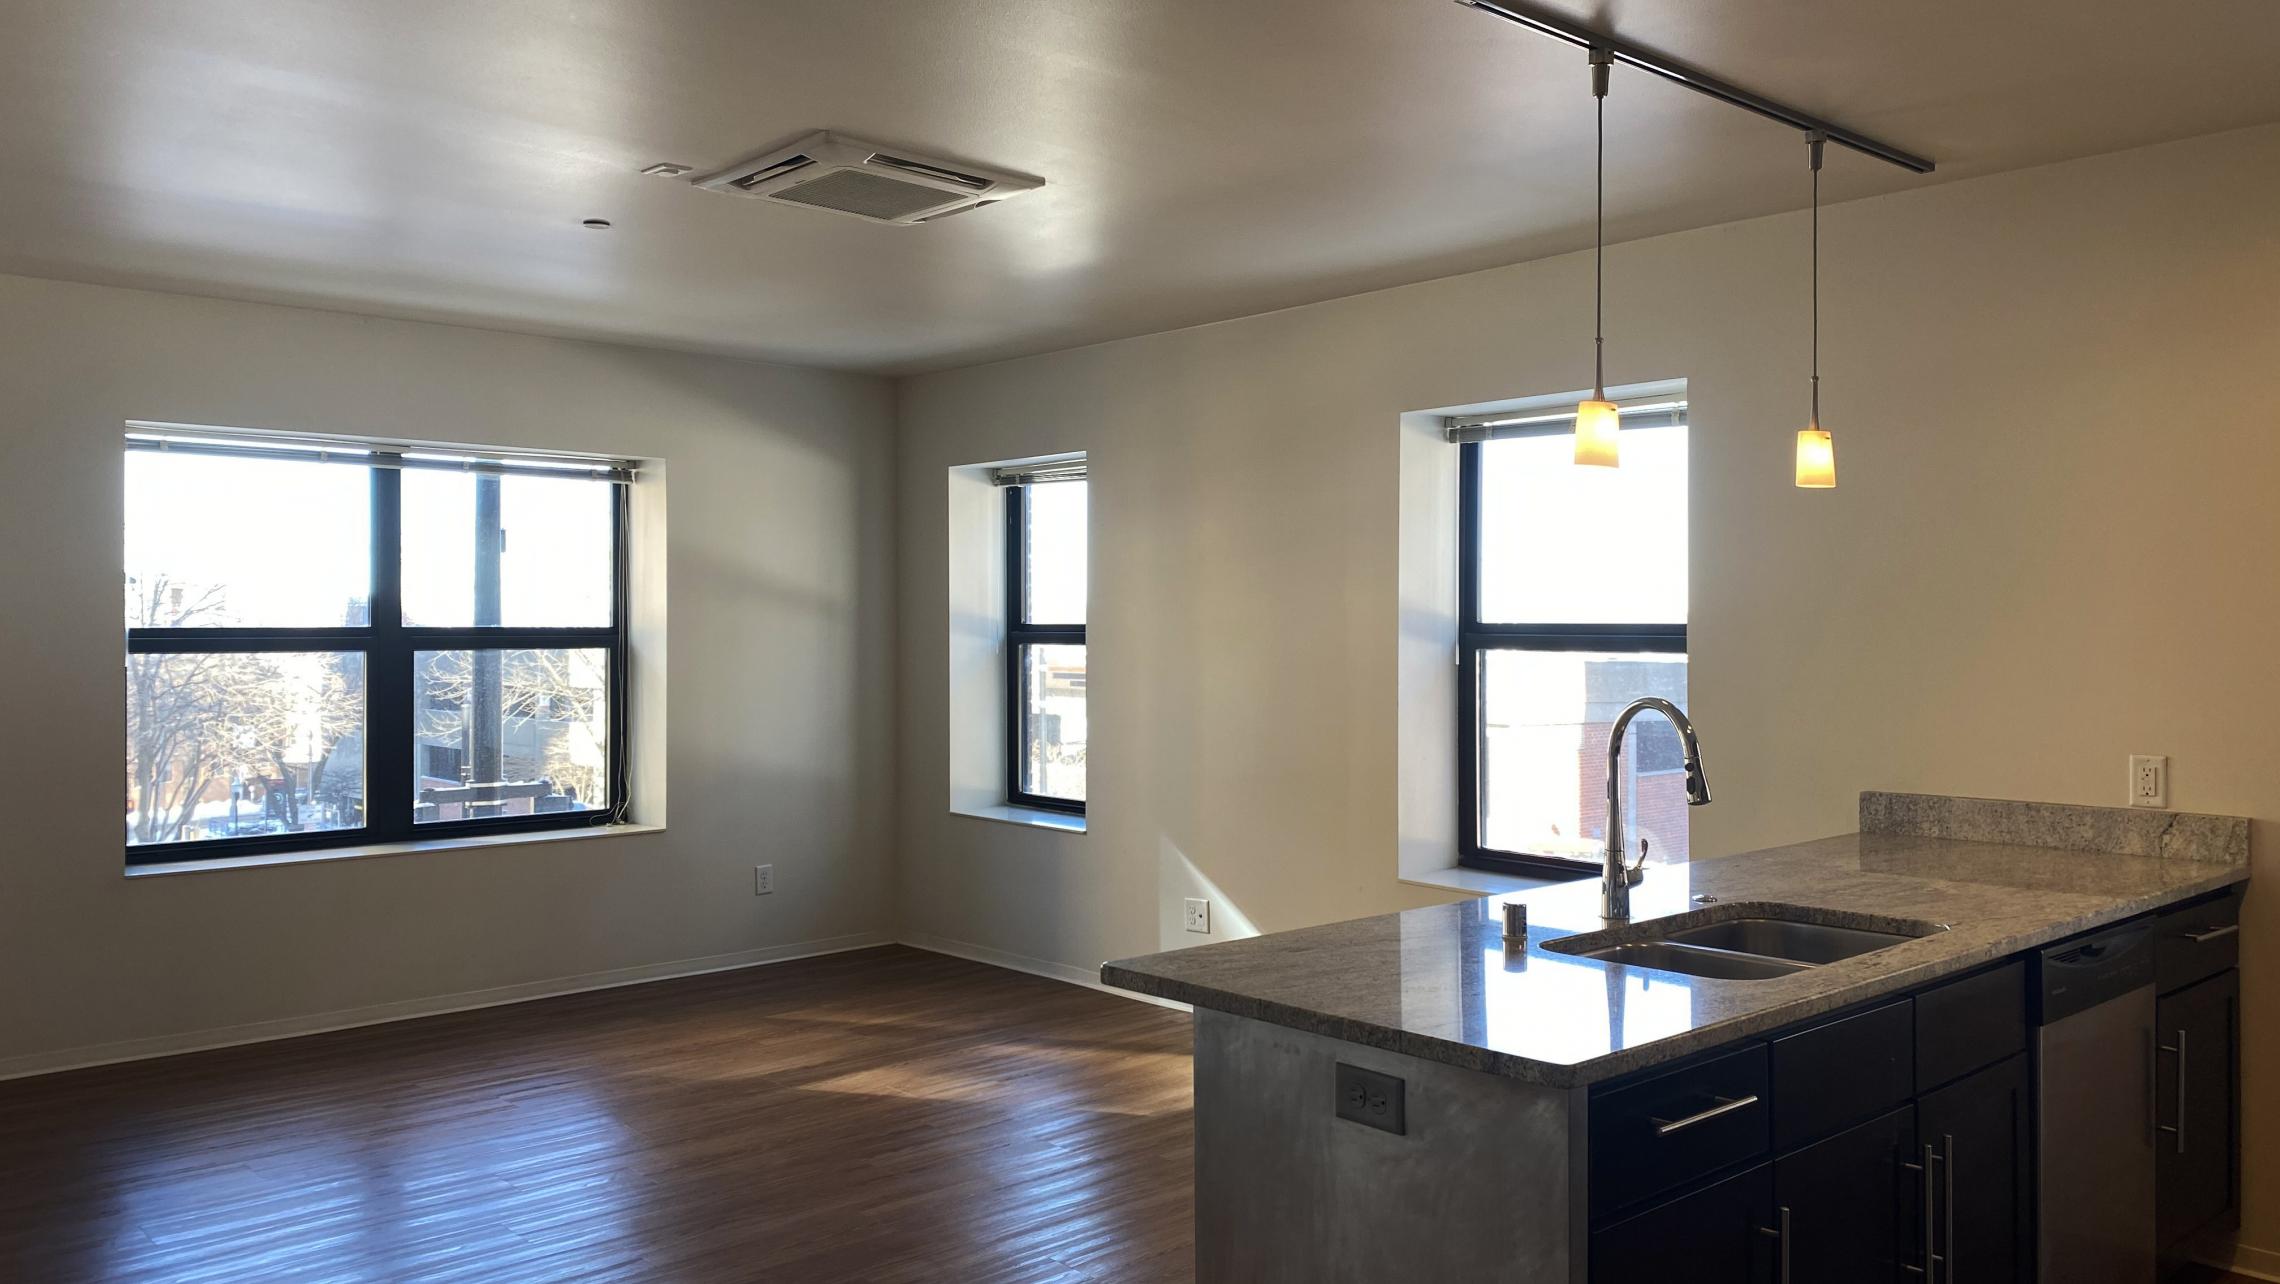 Capitol-Hill-Apartment-201-One-Bedroom-Corner-Downtown-Madison-Capitol-Square-Upscale-Luxury-Modern-Lifestyle-Views-Lake-Cats-Living-Bathroom-Kithcen-Laundry